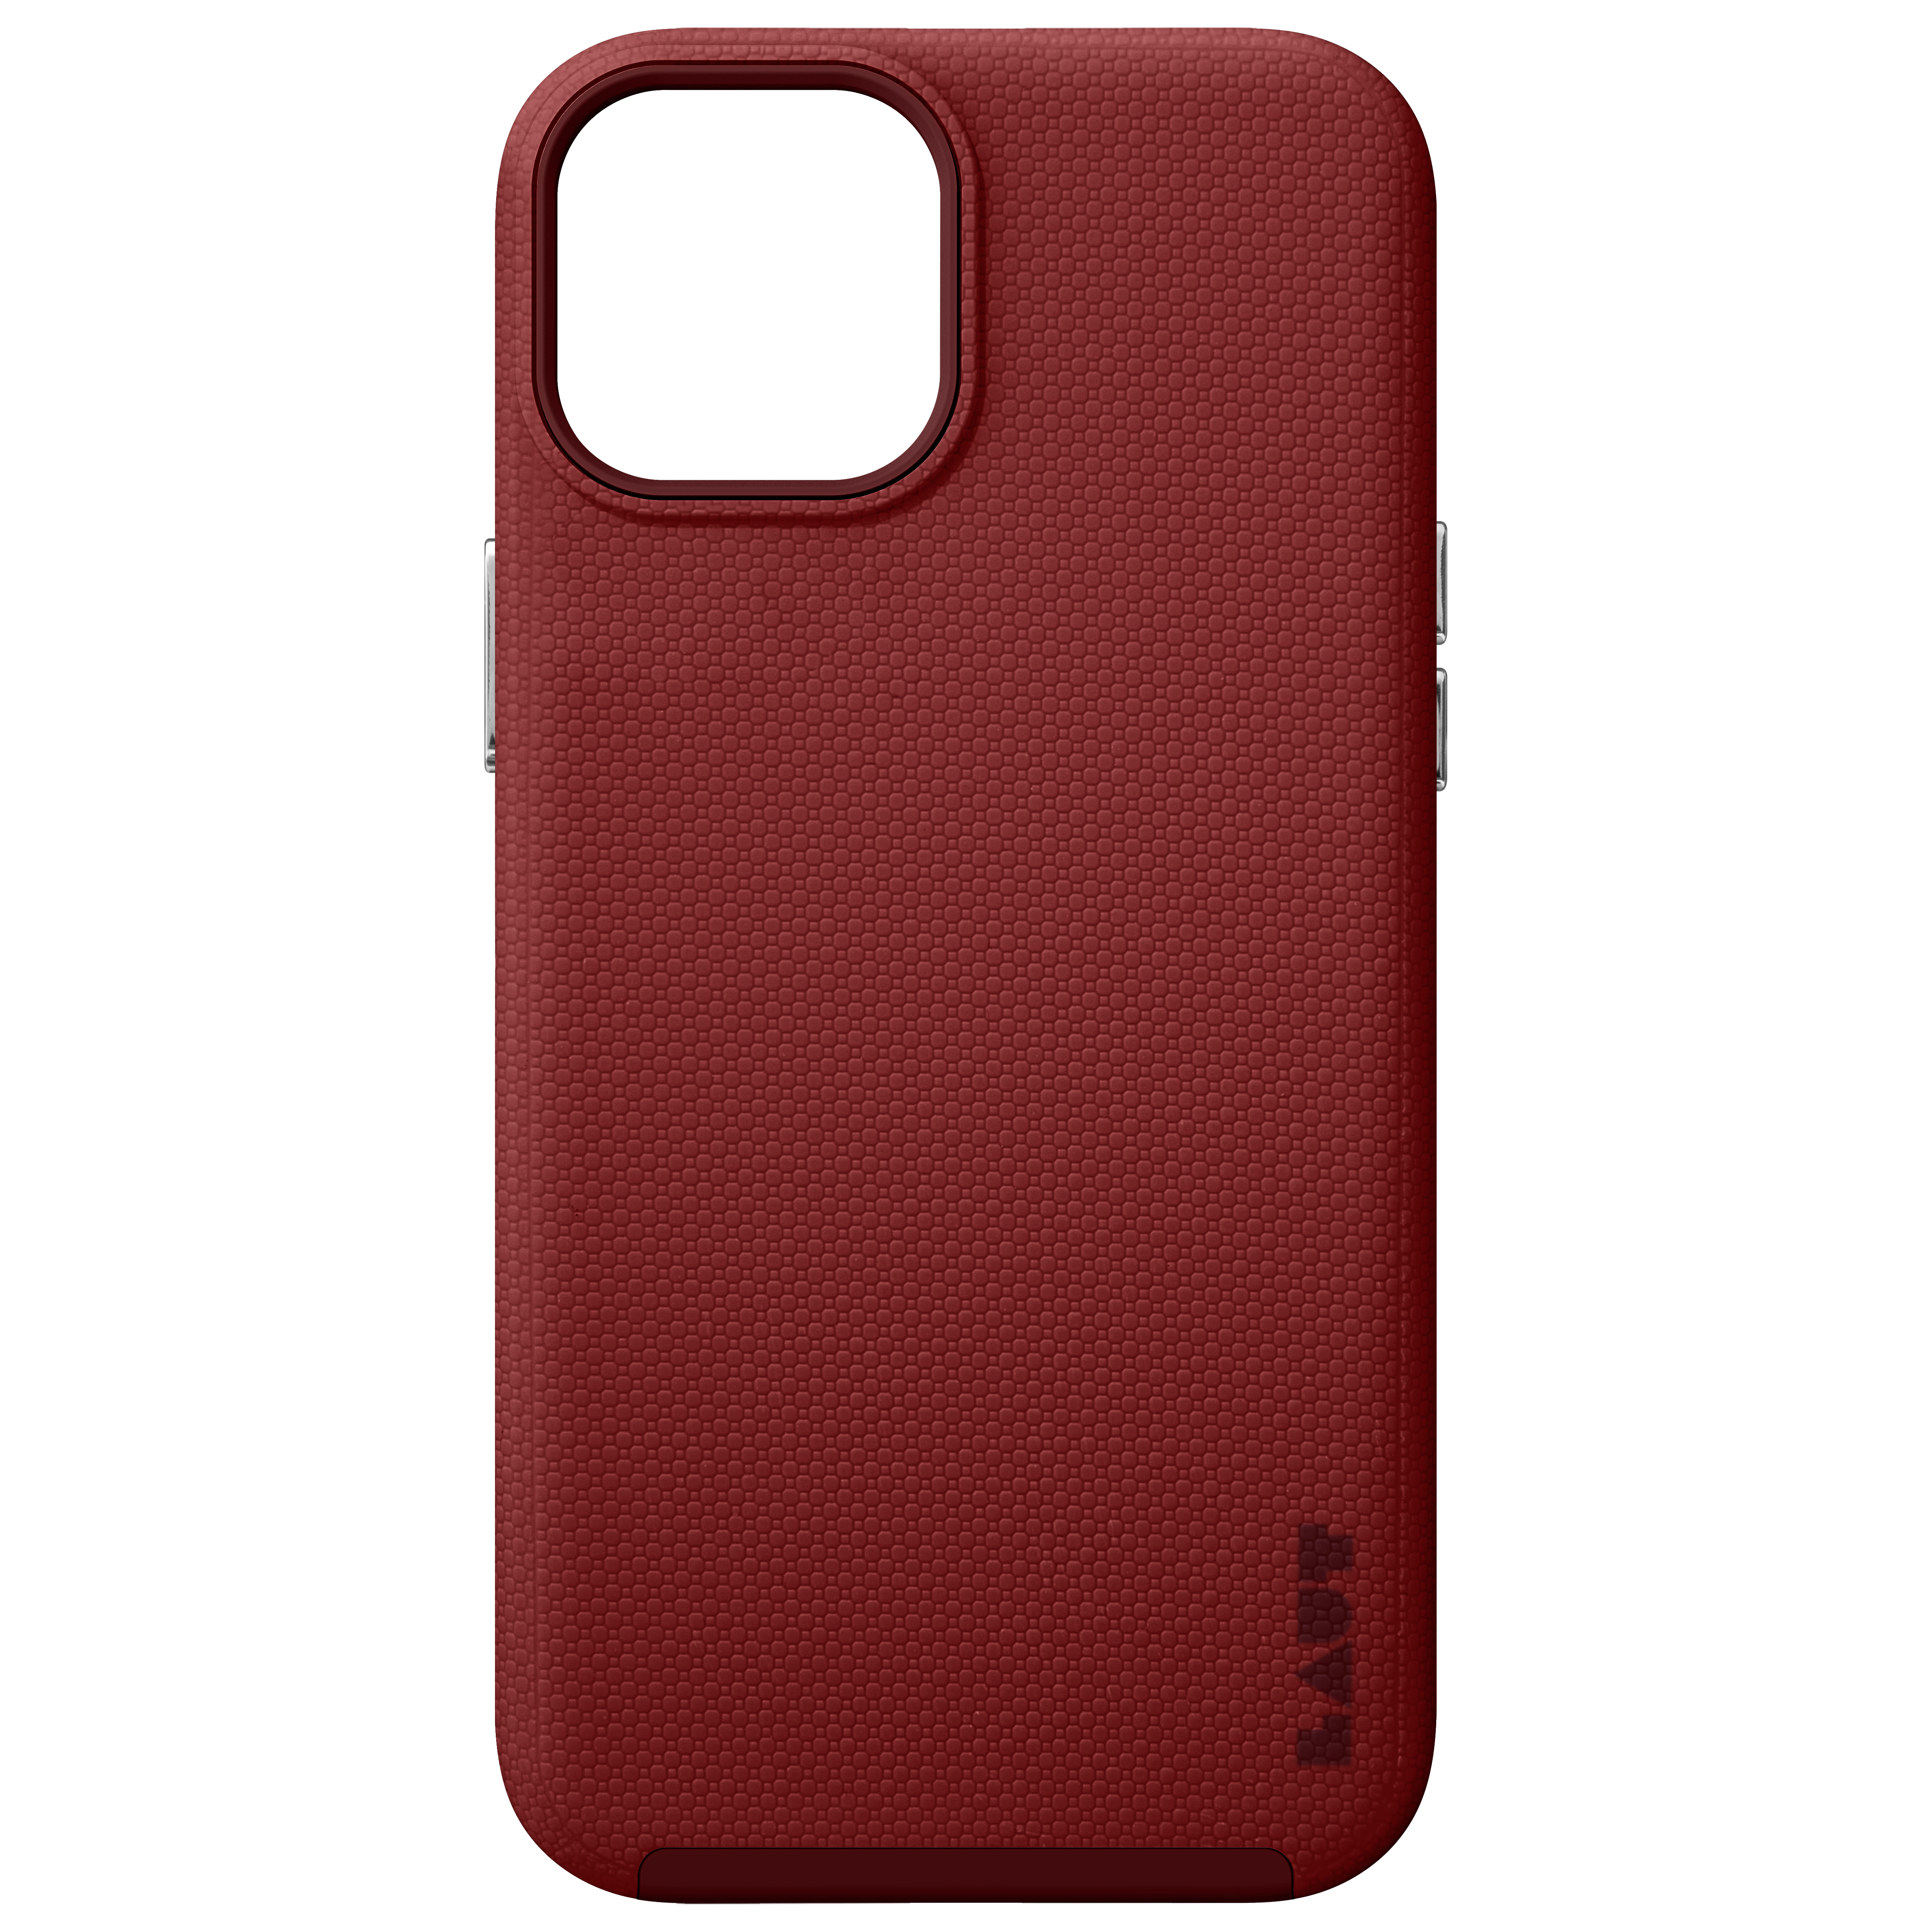 LAUT MINI, 13 IPHONE Backcover, Shield, APPLE, RED